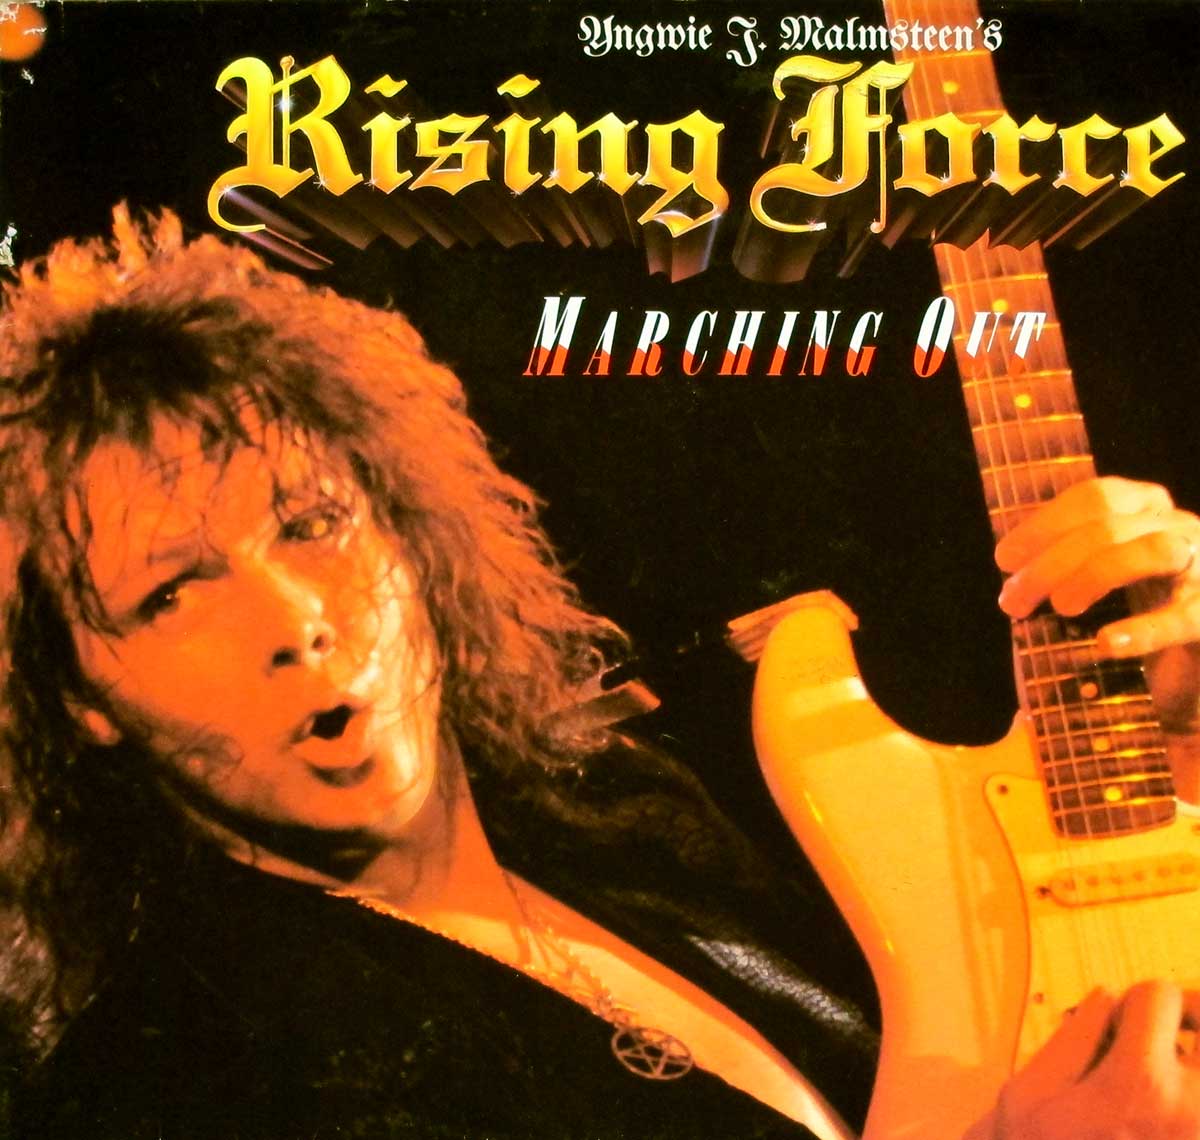 High Quality Photo of Album Front Cover  "YNGWIE MALMSTEEN'S RISING FORCE - Marching Out"